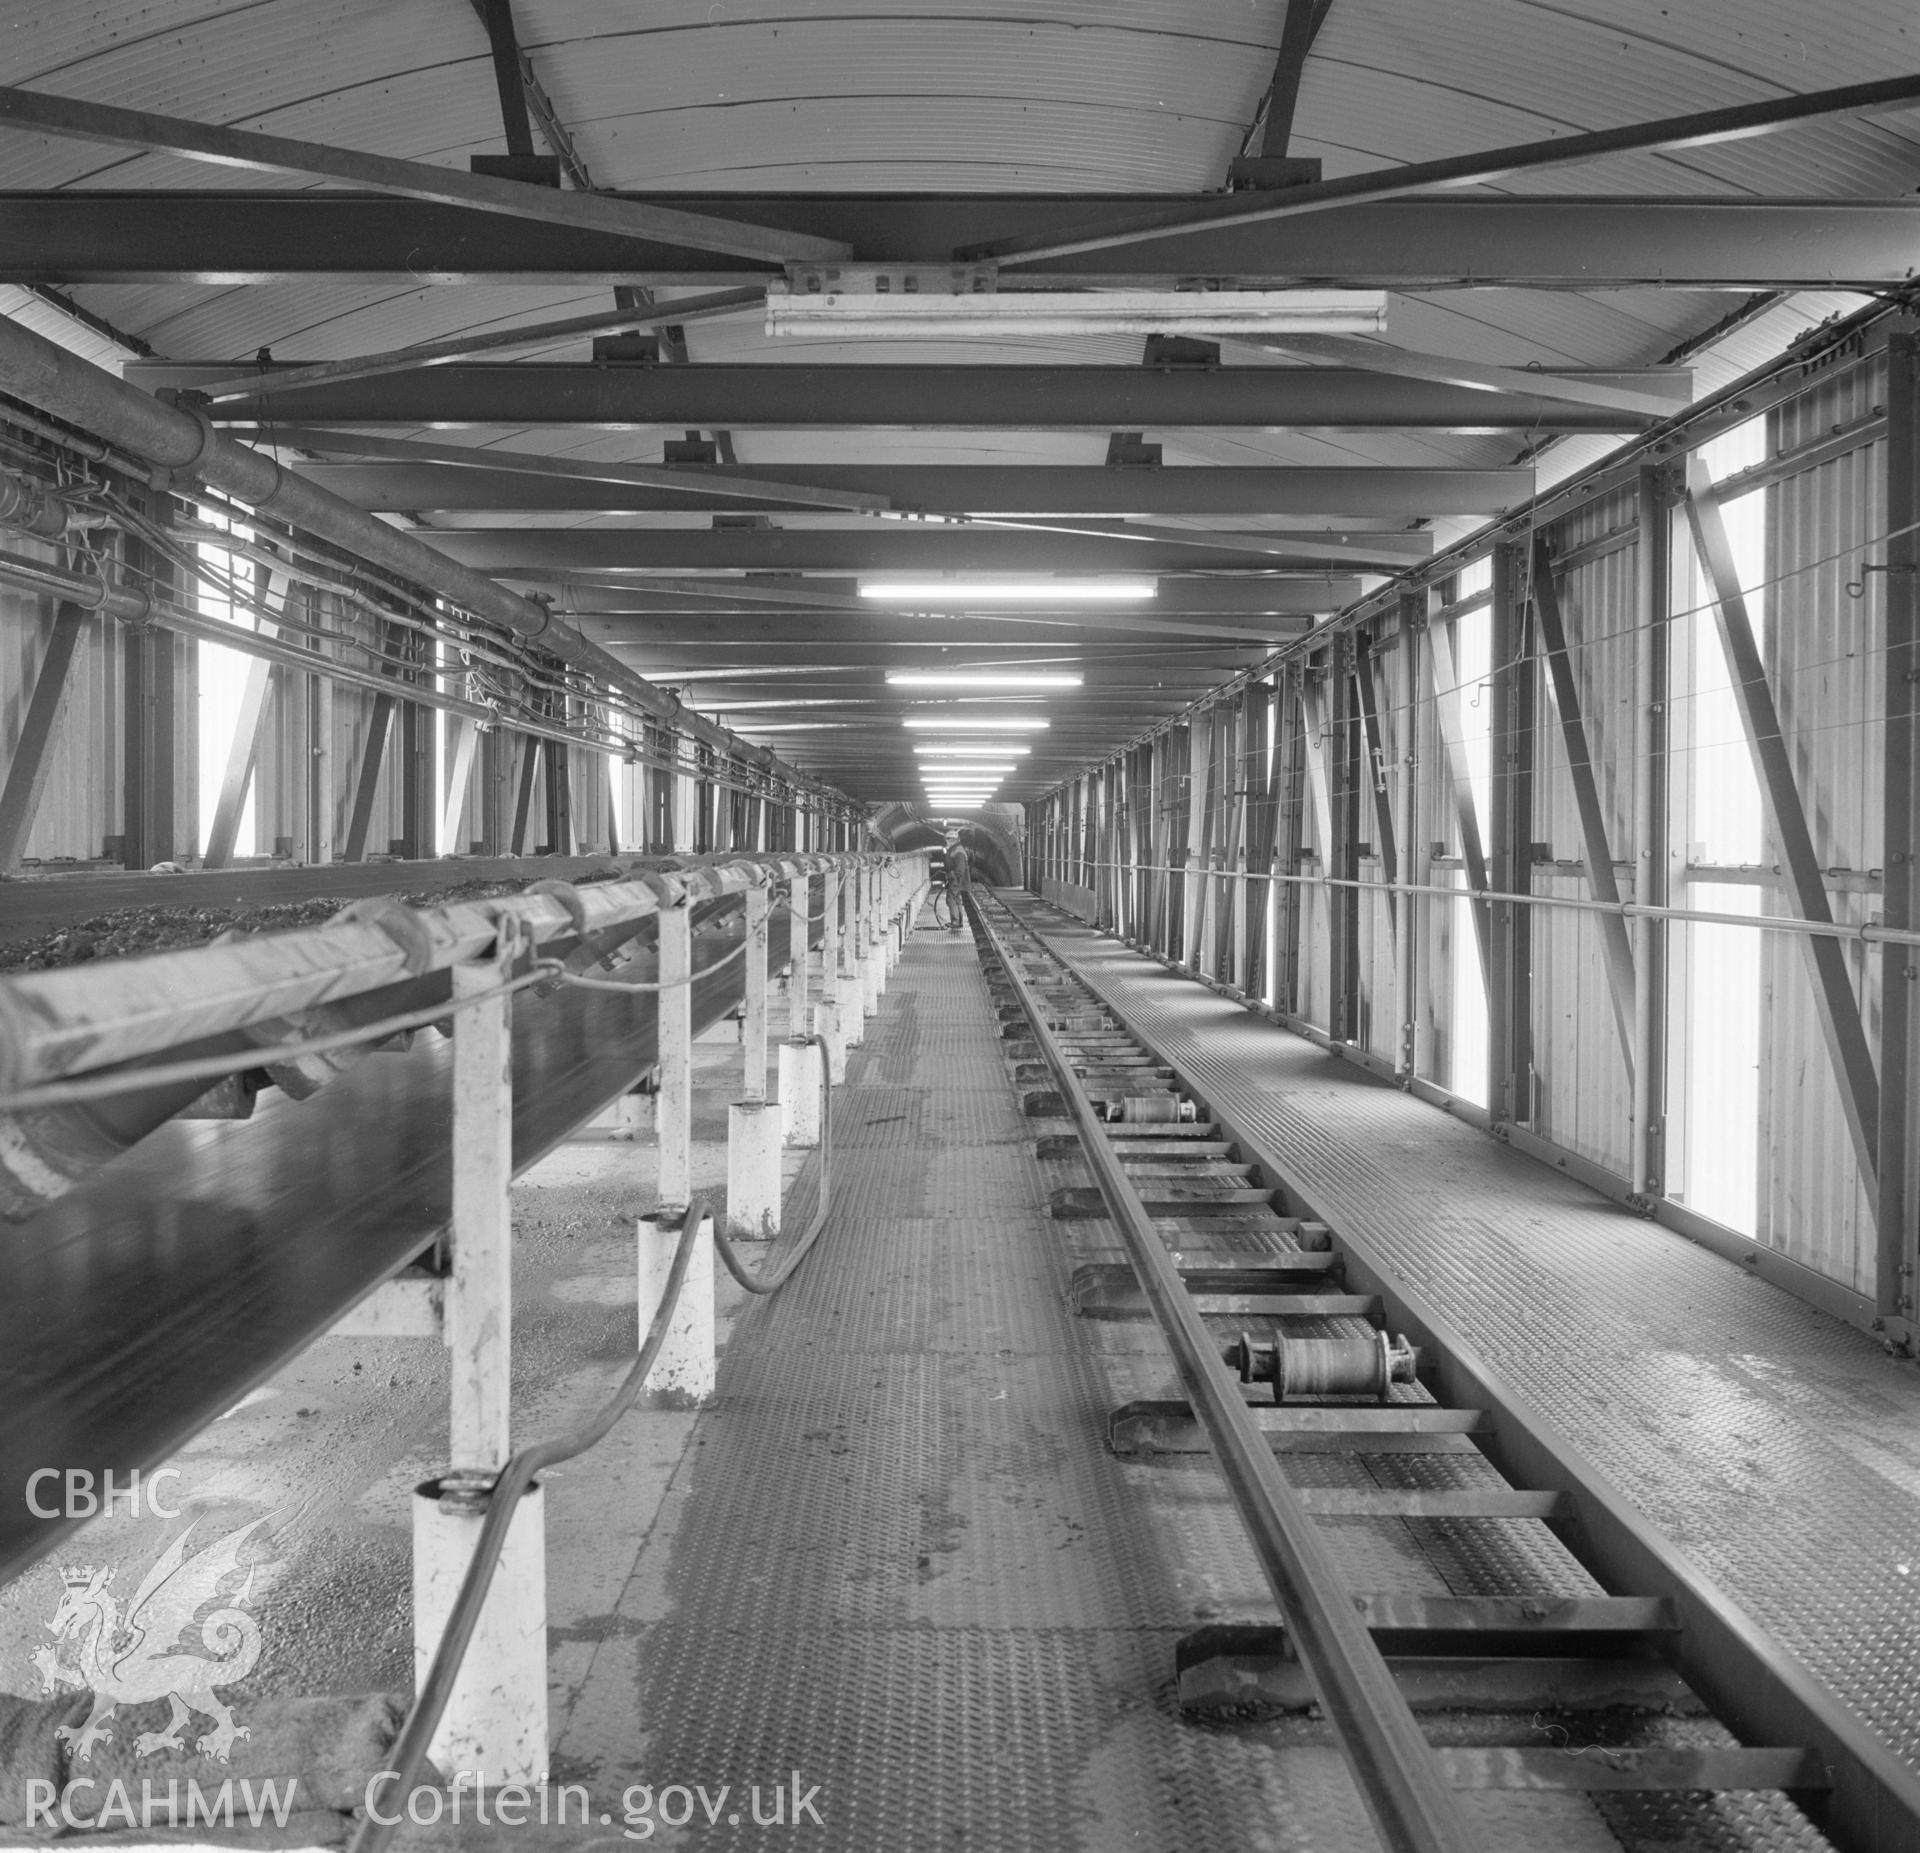 Digital copy of an acetate negative showing top of drift at Blaenant Colliery, from the John Cornwell Collection.